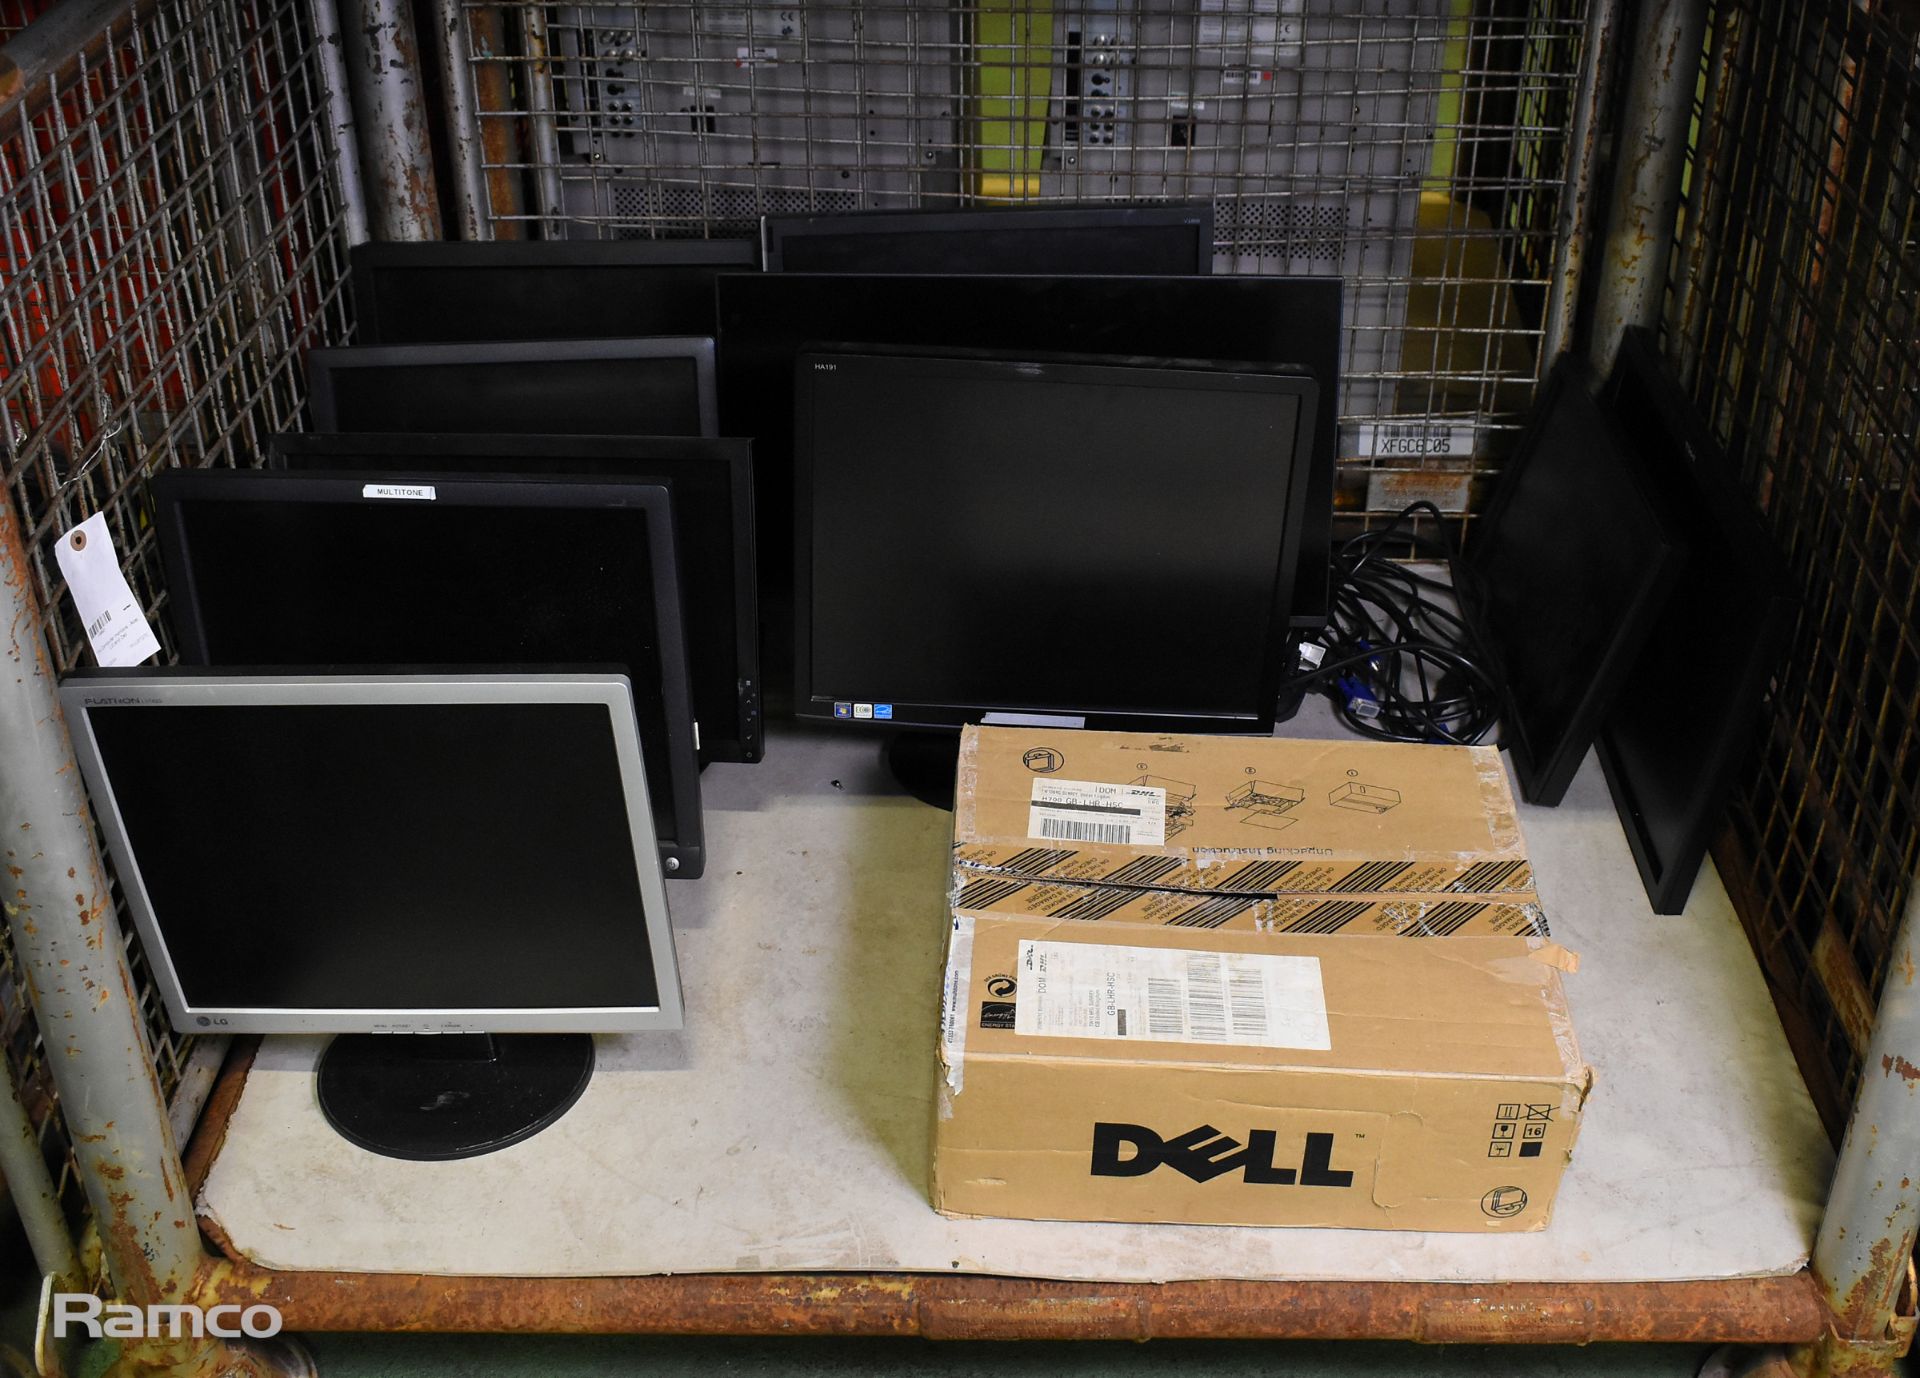 11x Computer monitors - Acer, LG and Dell